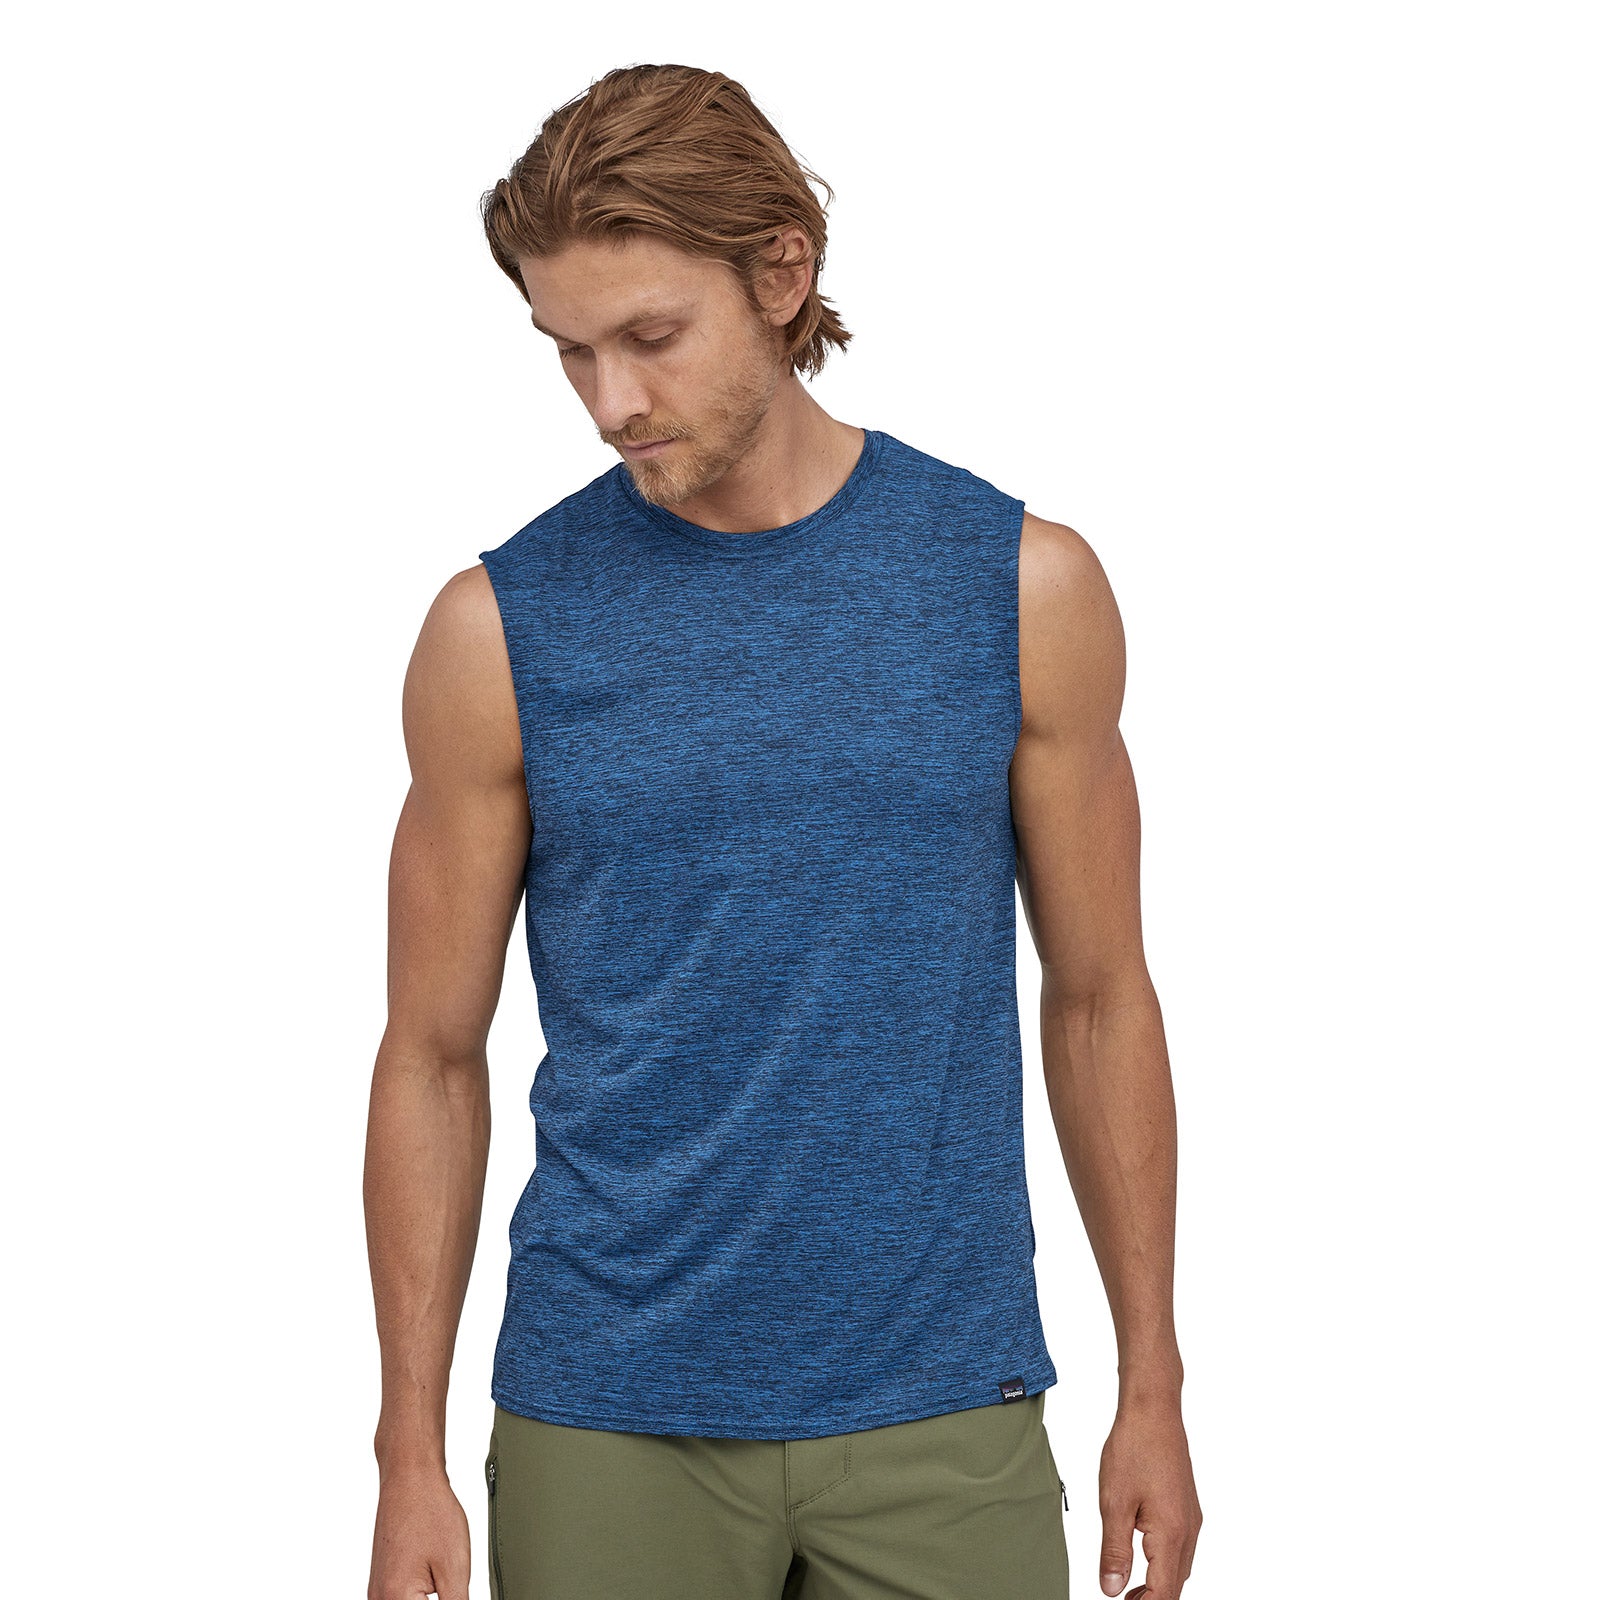 patagonia mens capilene cool daily tank in viking blue - navy blue x dye, front view on a model